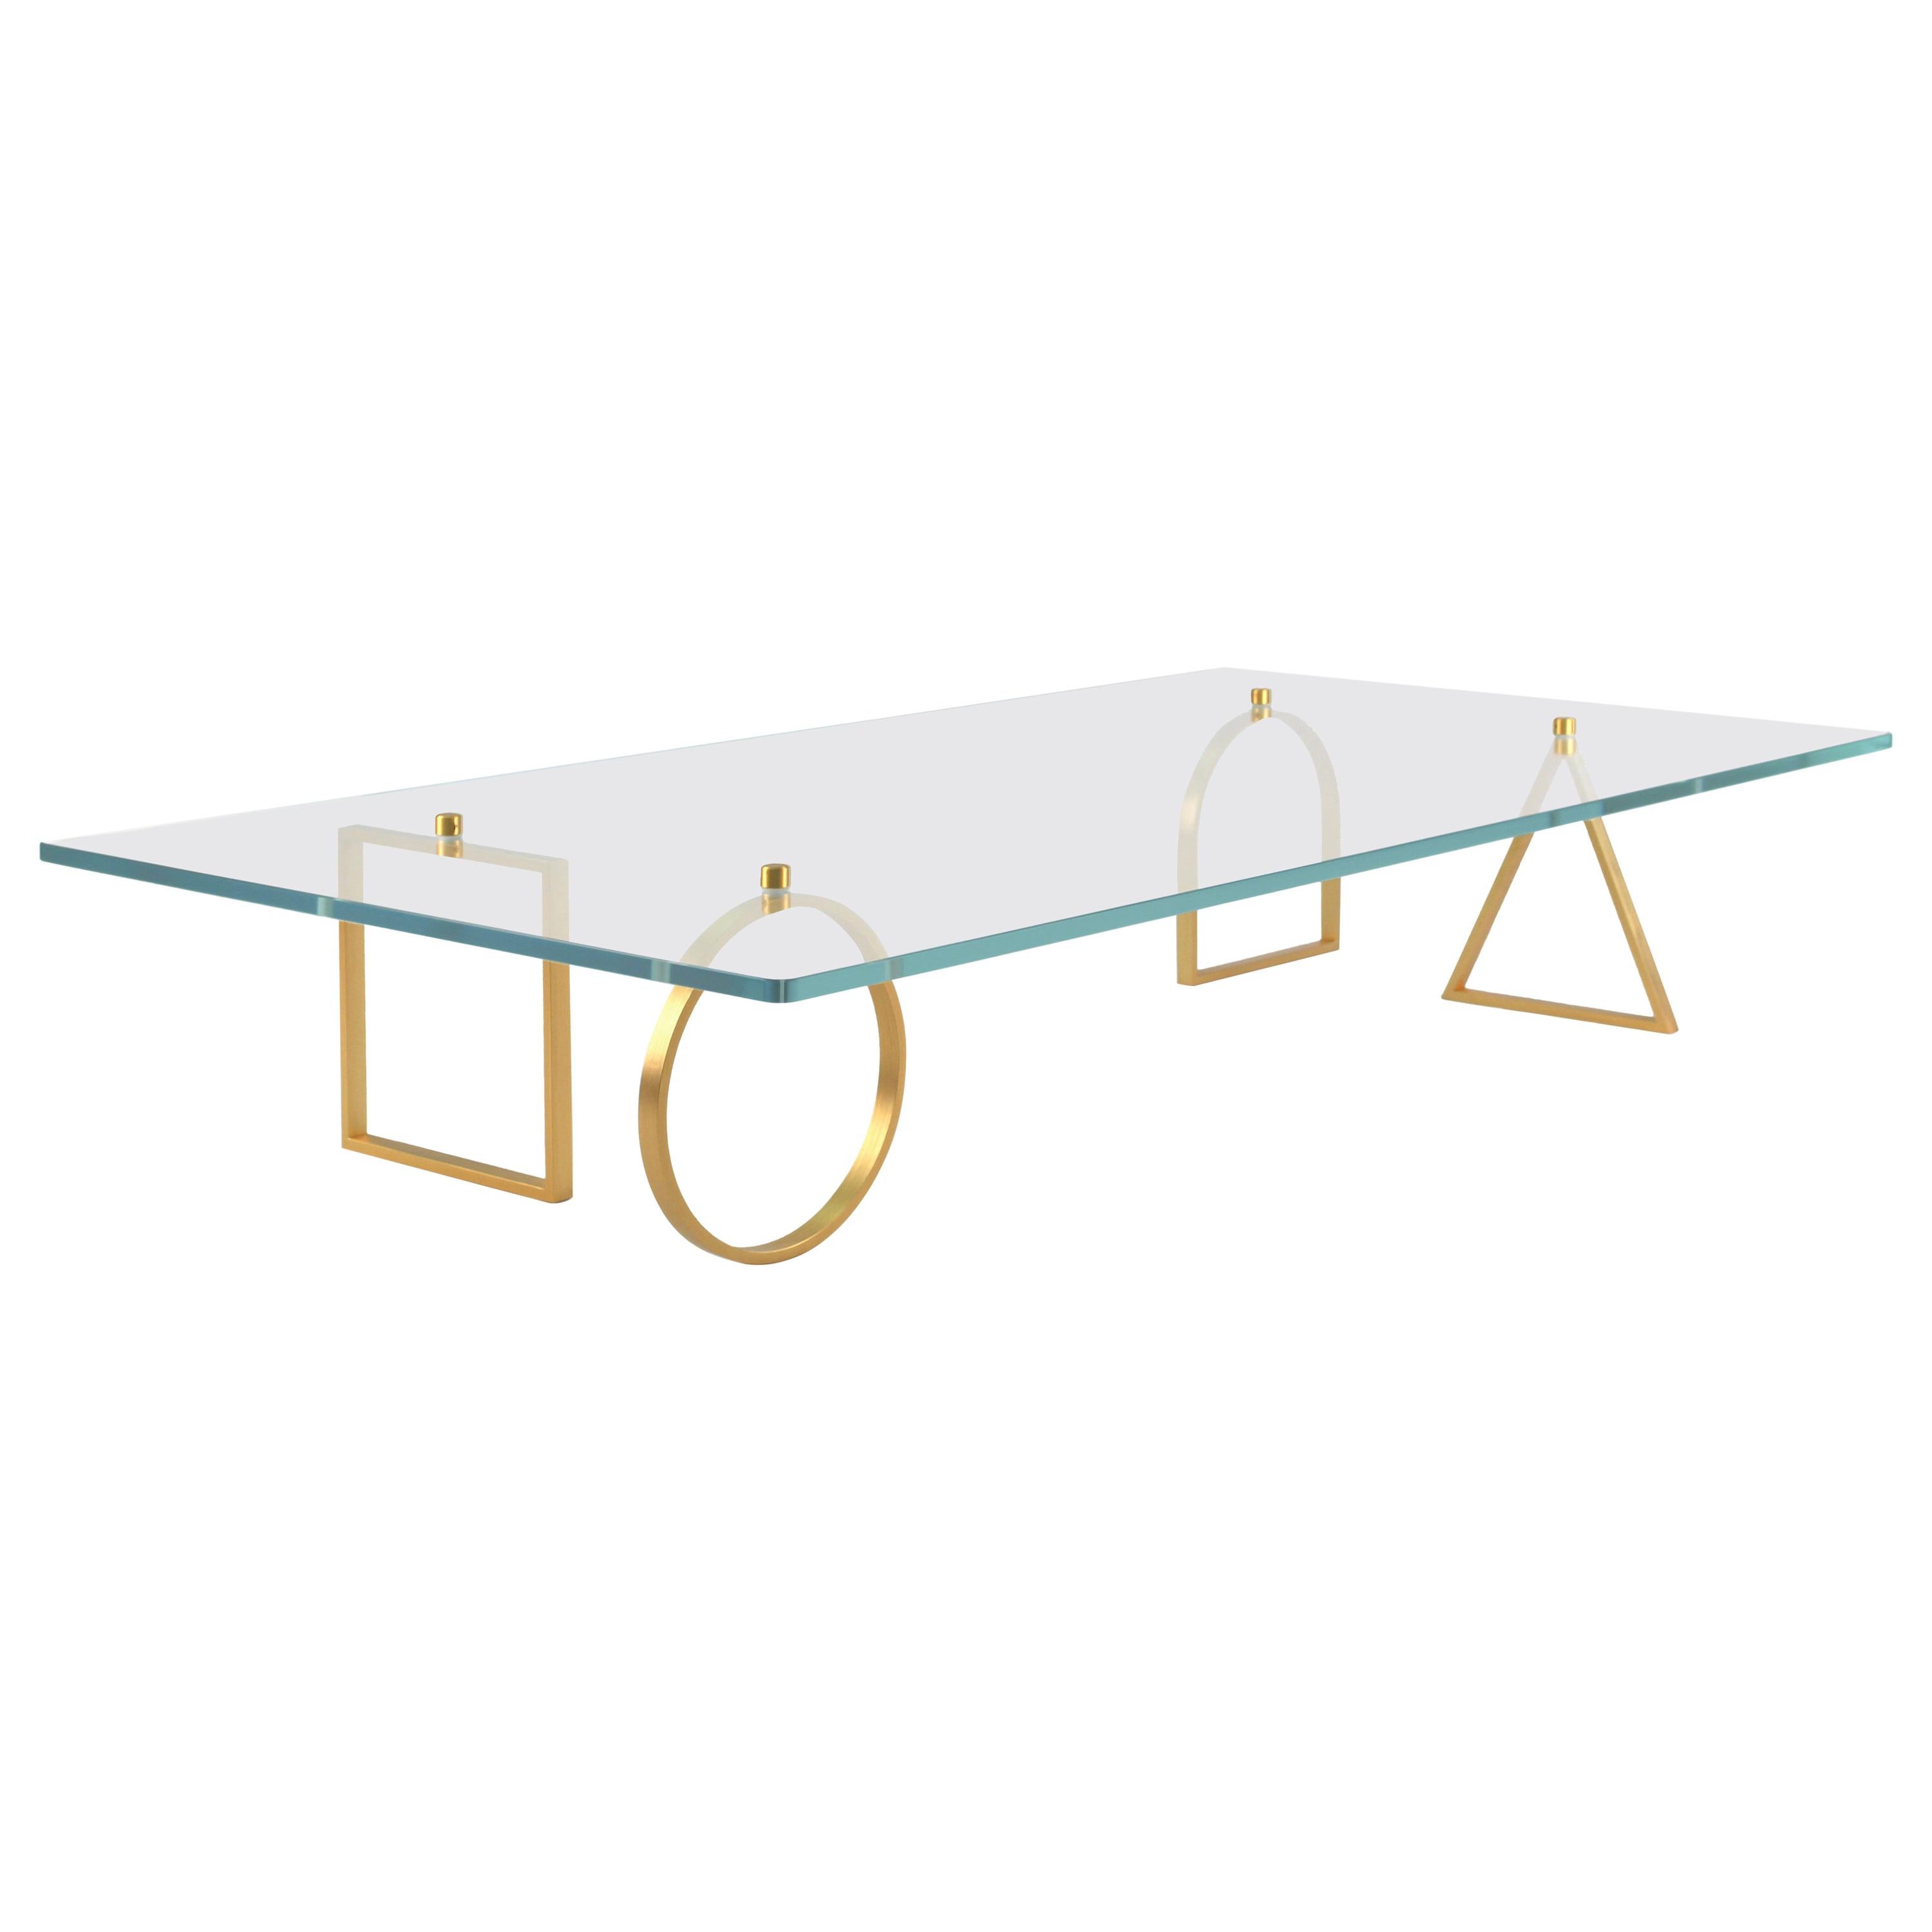 Brass and Glass "Bagatto" Coffee Table, Ilaria Bianchi